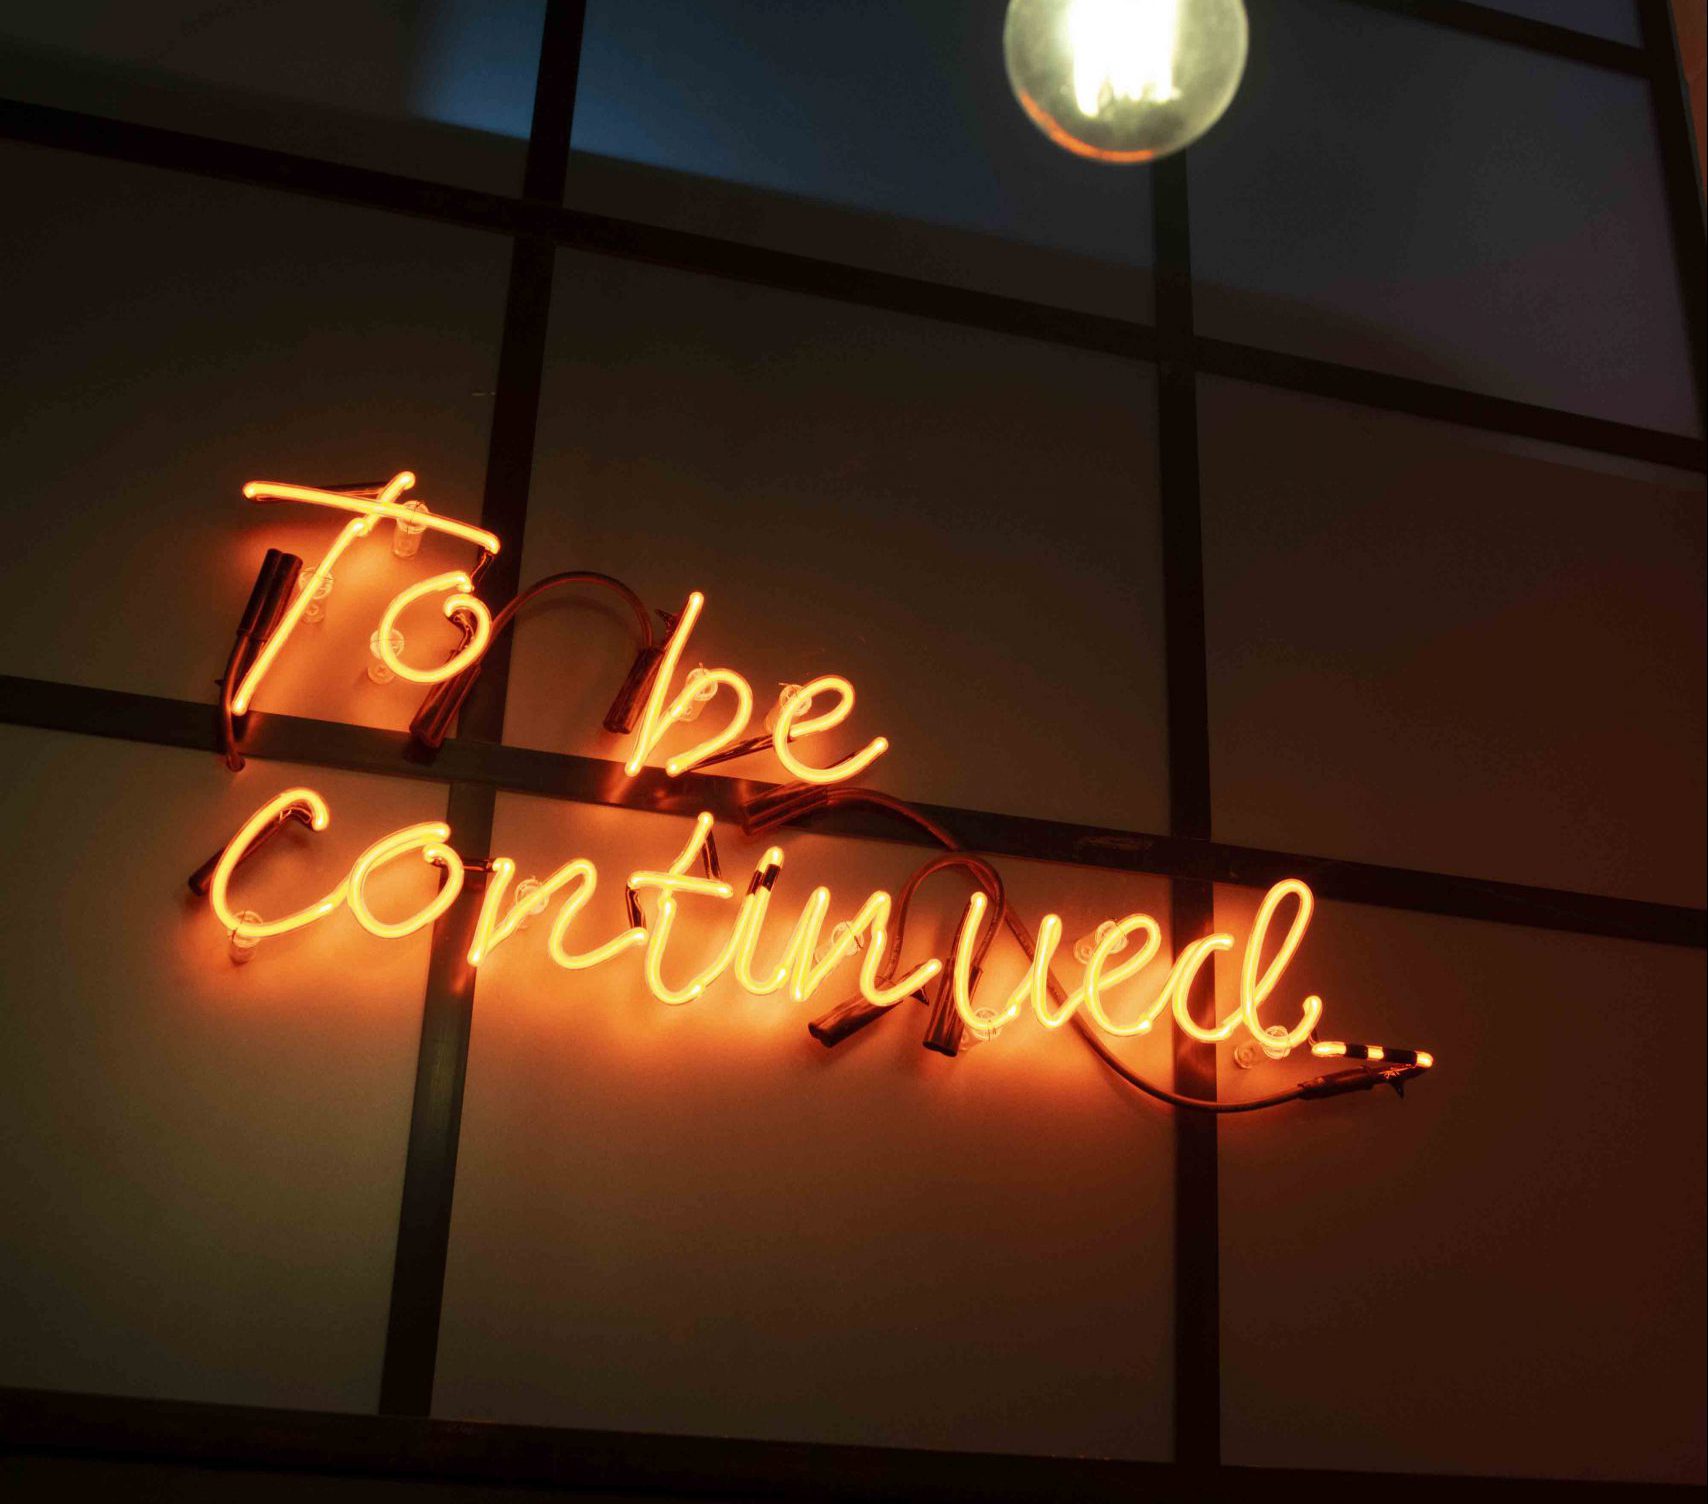 'To be continued' light up sign